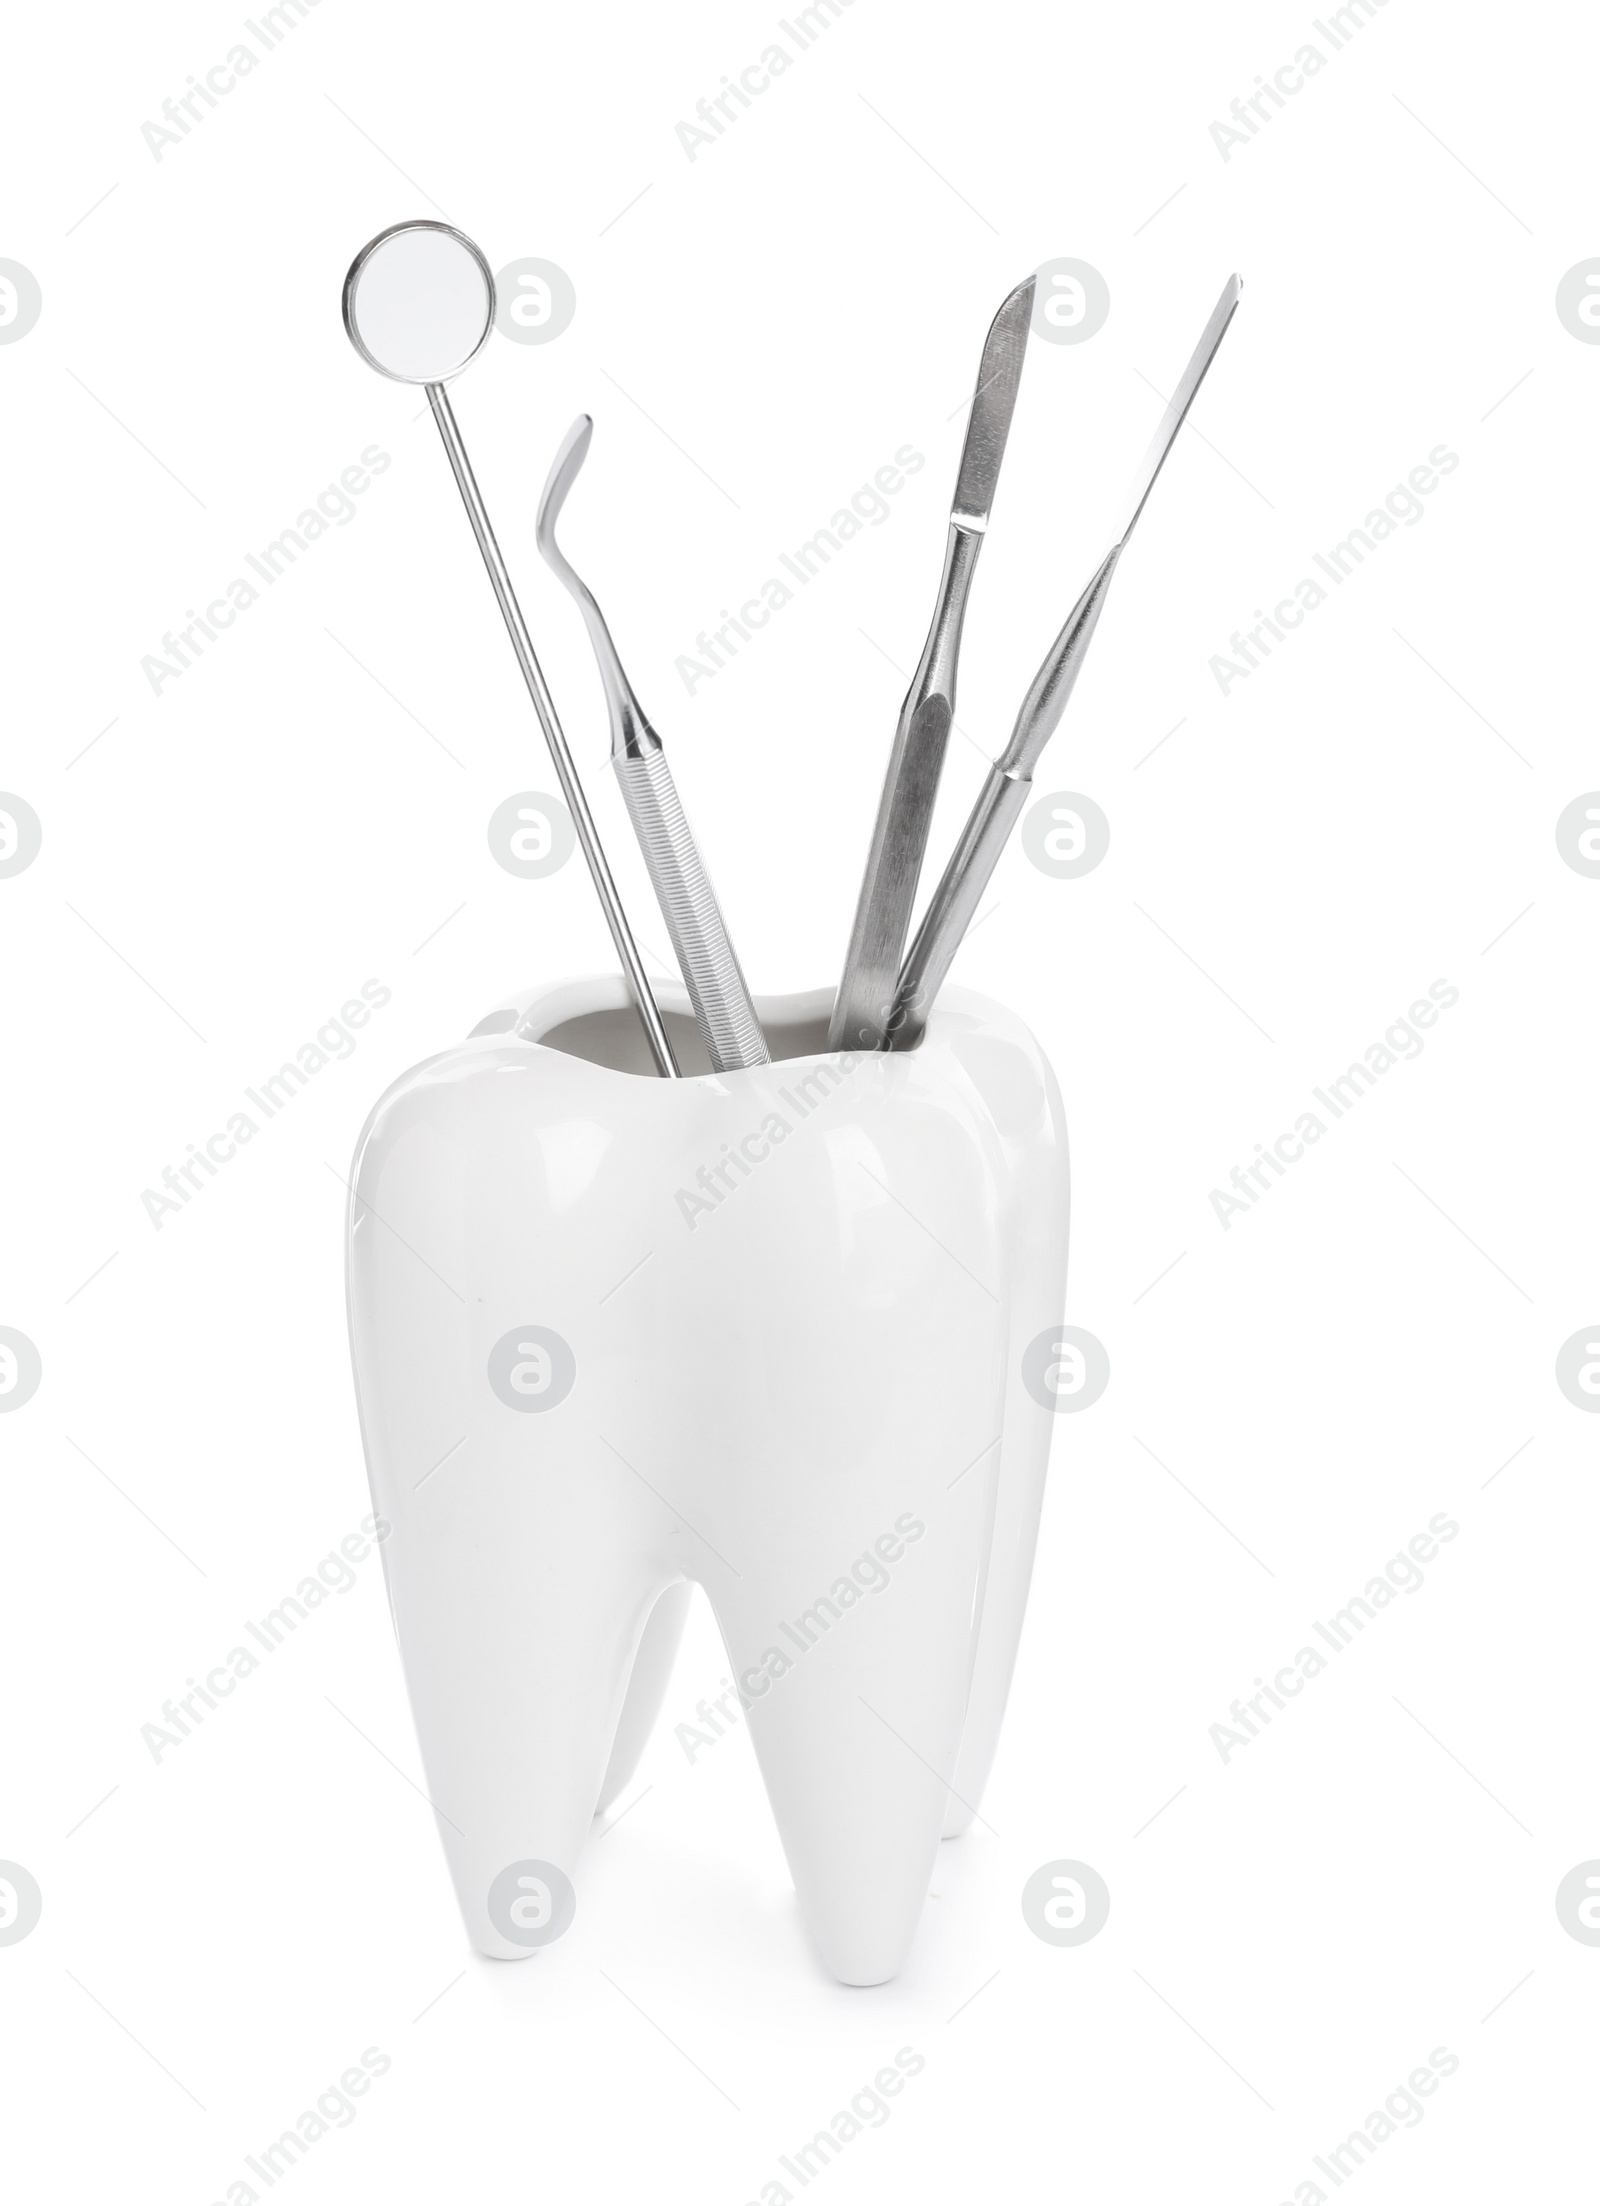 Photo of Tooth shaped holder with dental tools on white background